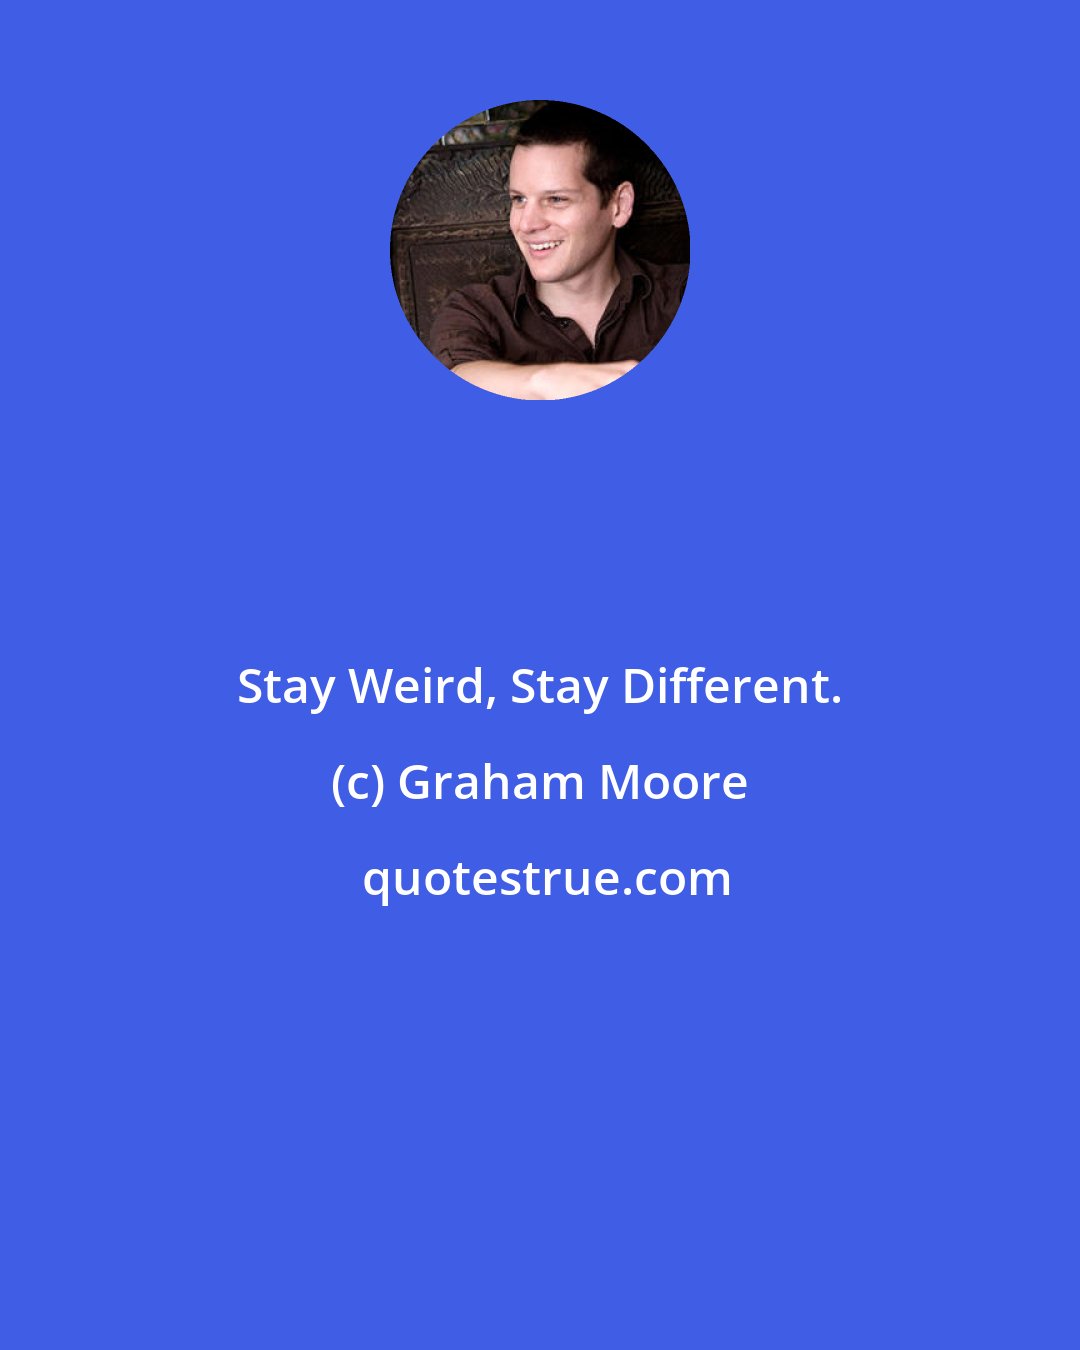 Graham Moore: Stay Weird, Stay Different.